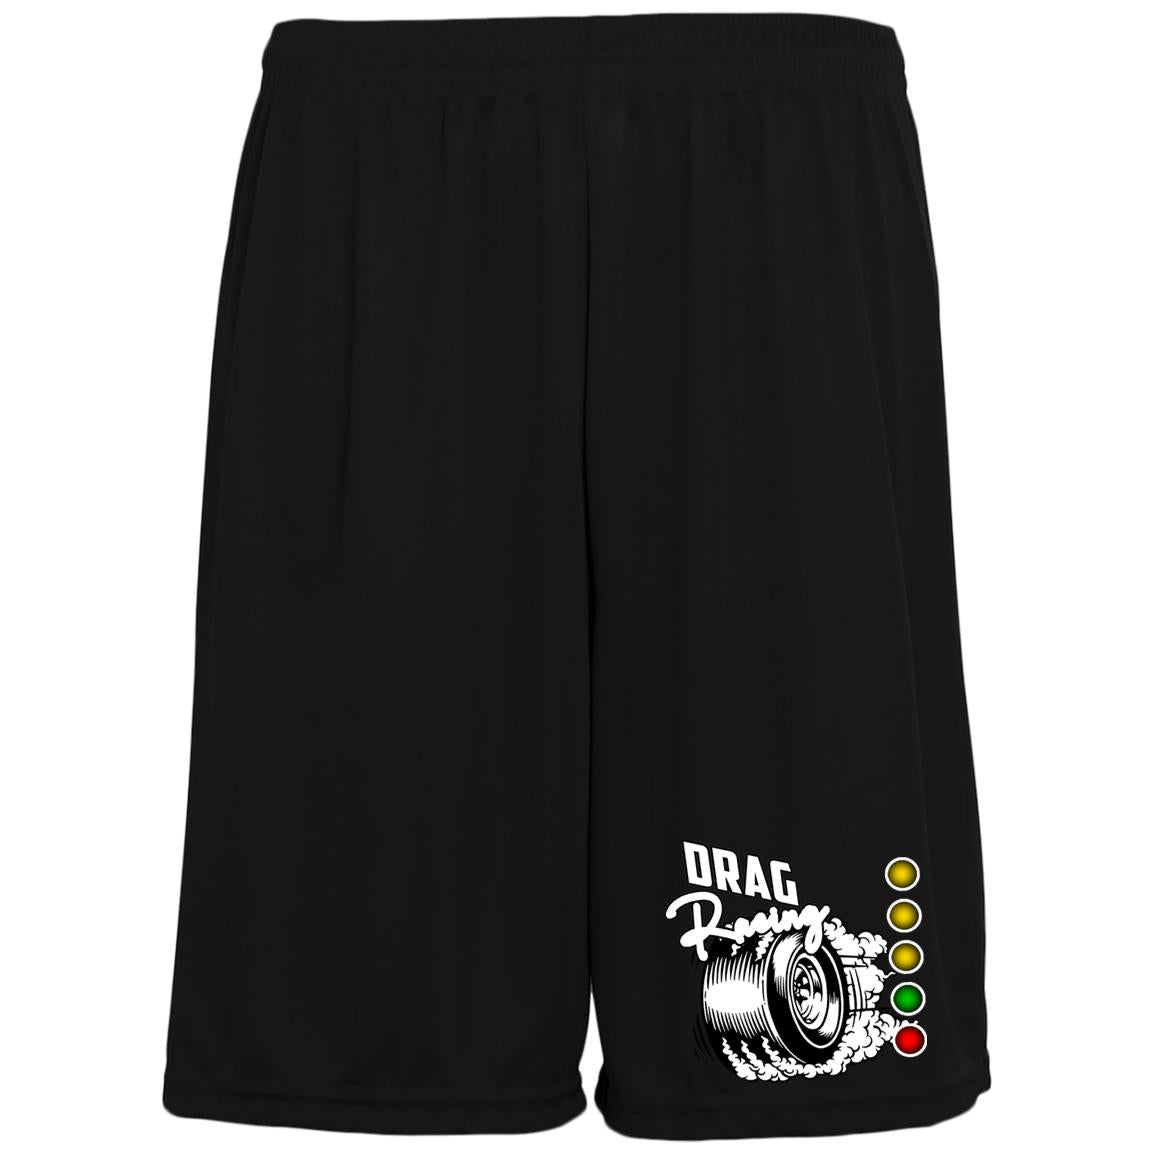 Drag Racing Moisture-Wicking Pocketed 9 inch Inseam Training Shorts